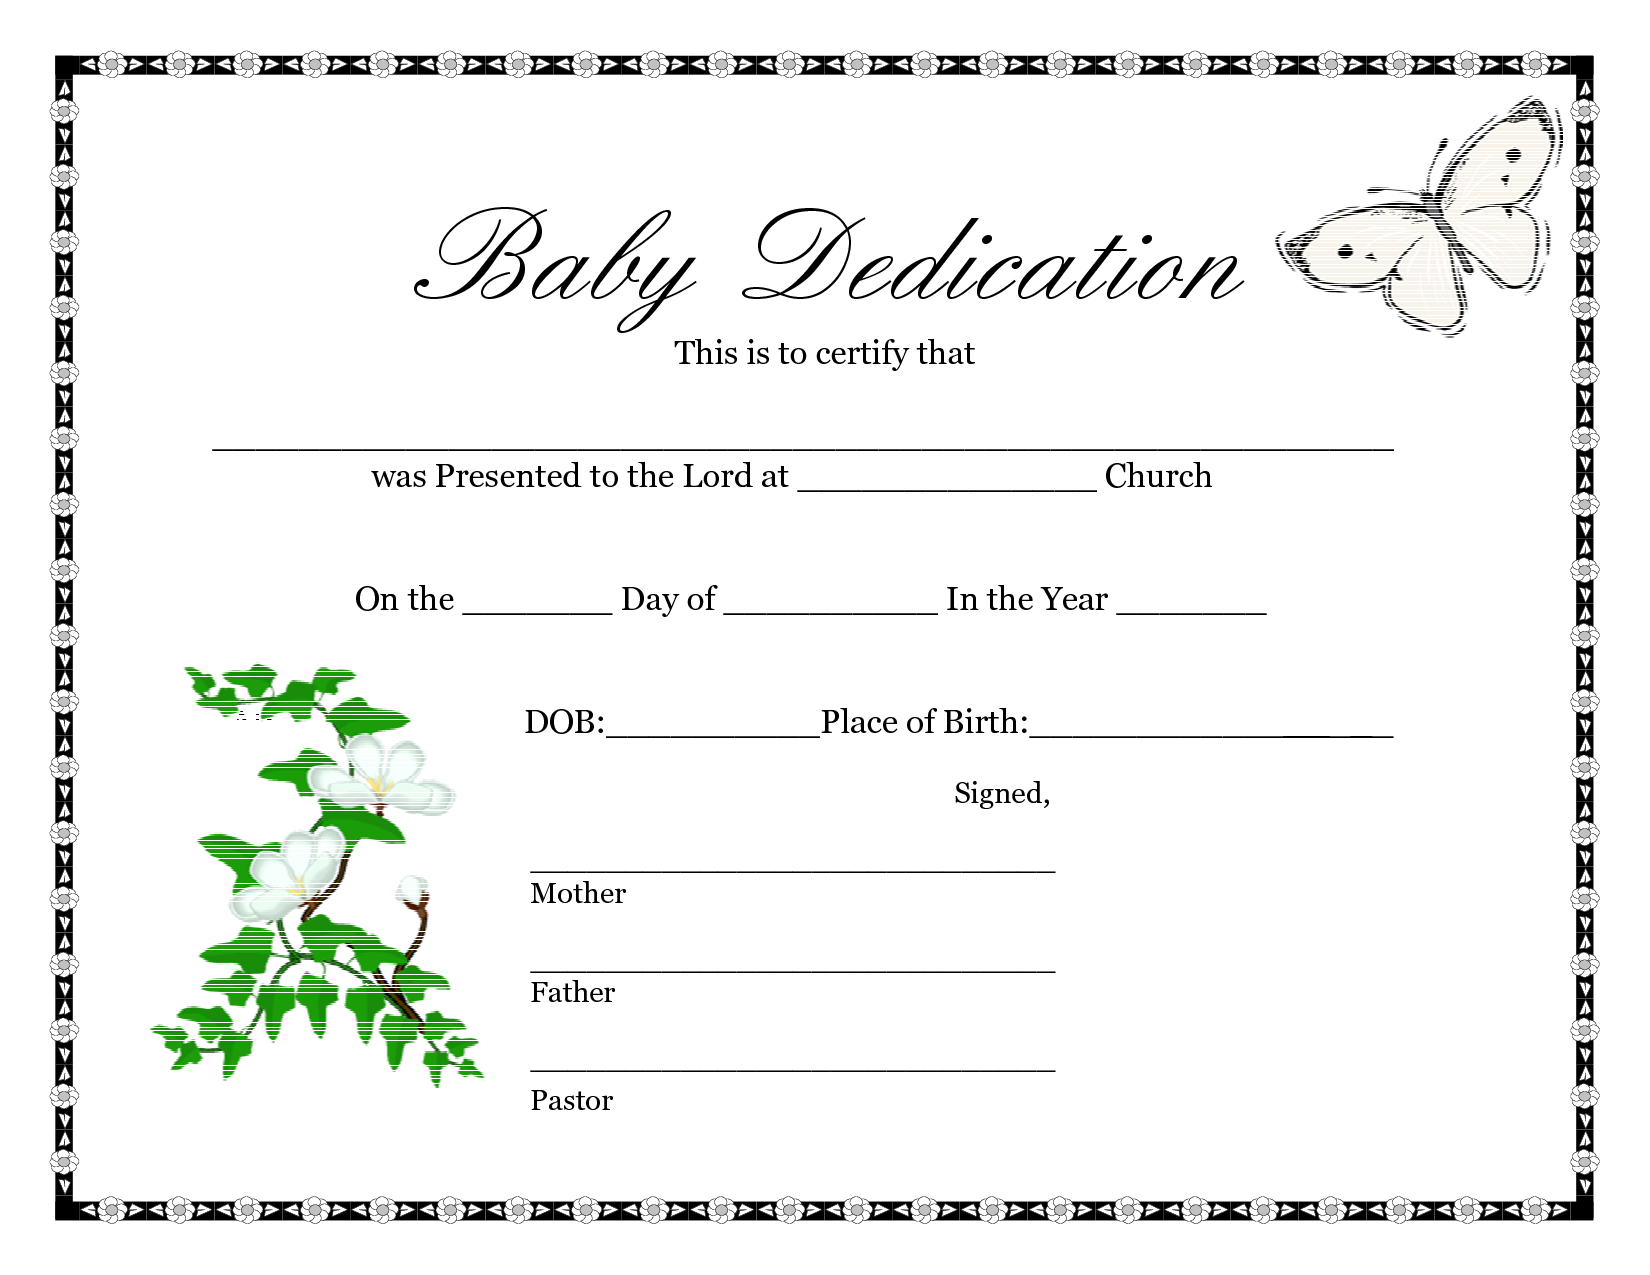 Downloadable Blank Birth Certificate Template Sample : V M D Regarding Birth Certificate Templates For Word